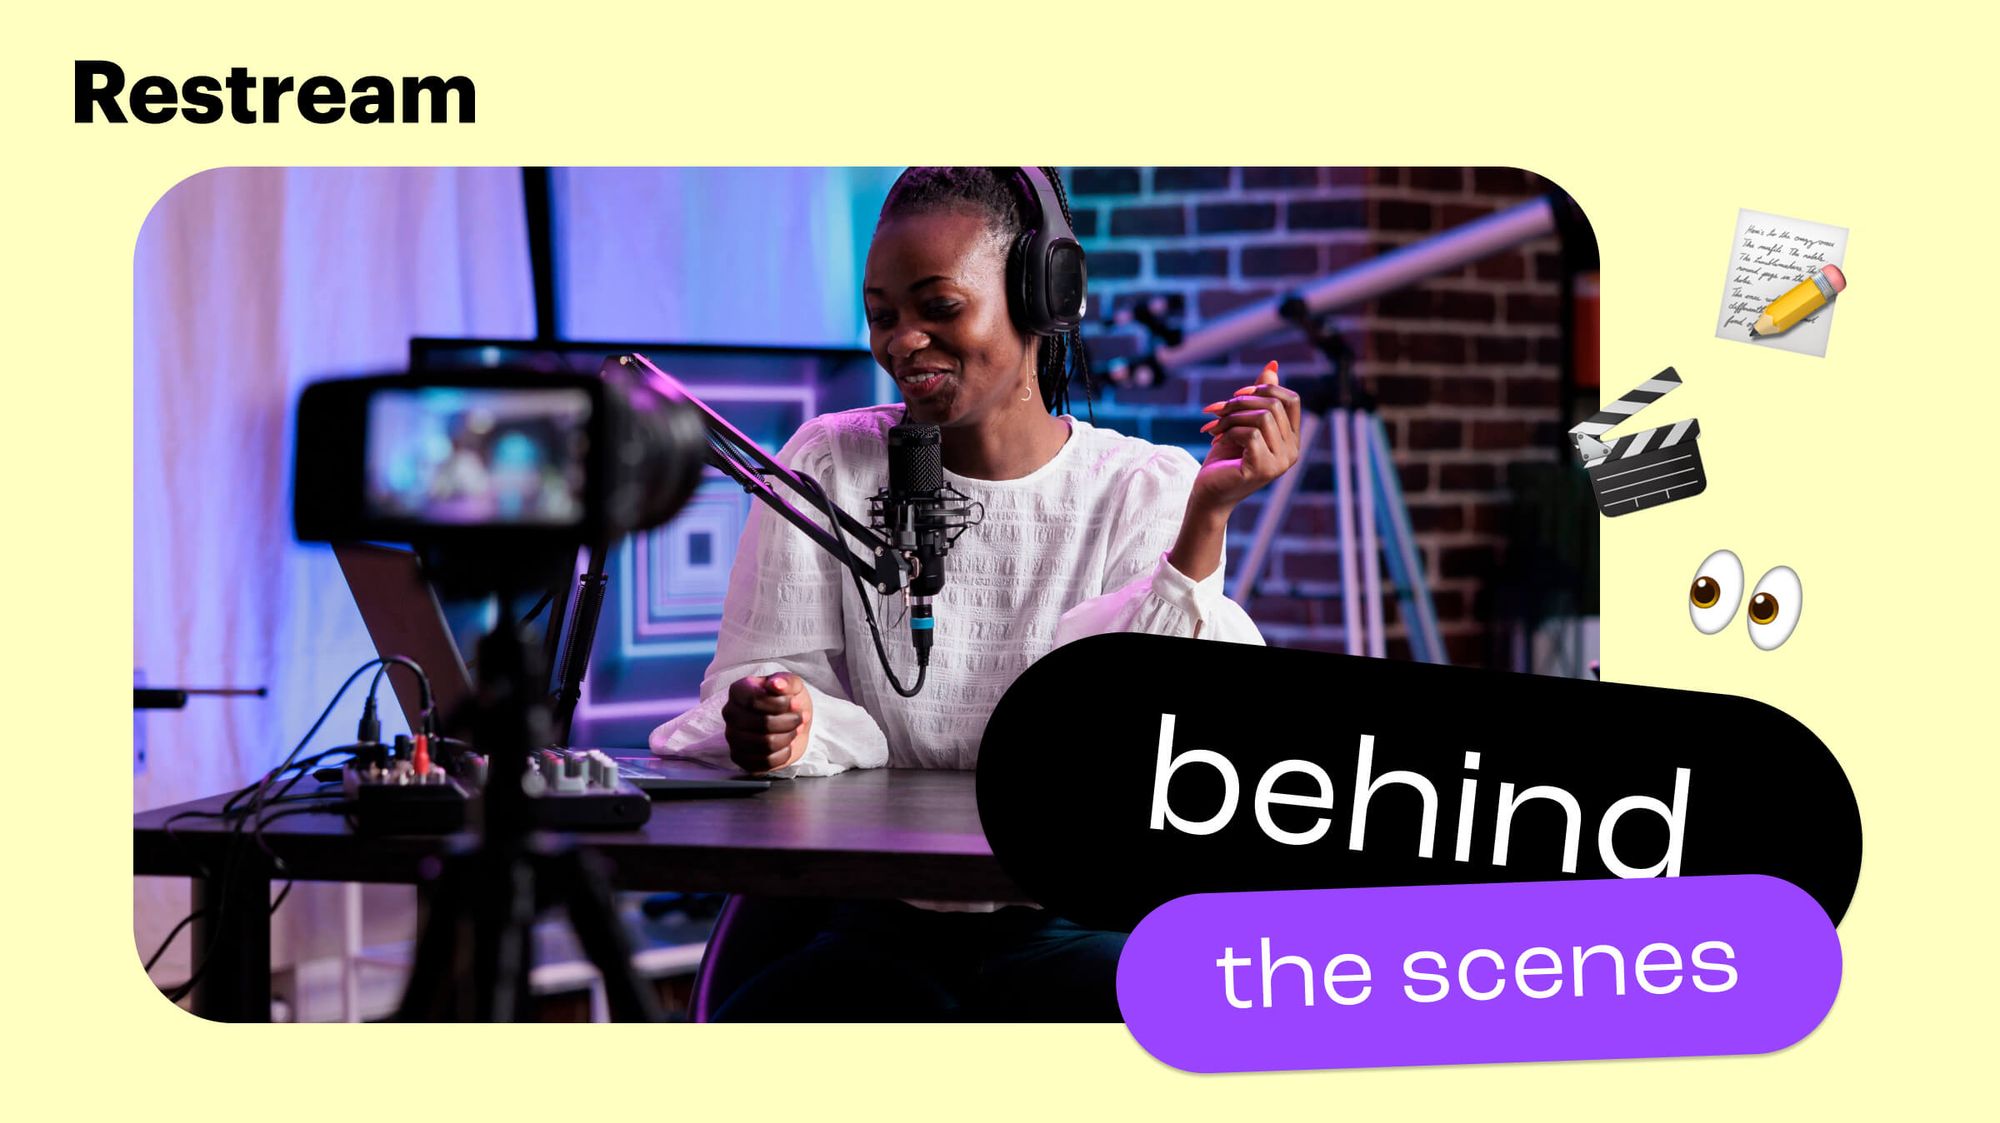 Consider live events or performances to interact with your audience in real-time.
Showcase behind-the-scenes footage or take viewers on a virtual tour.